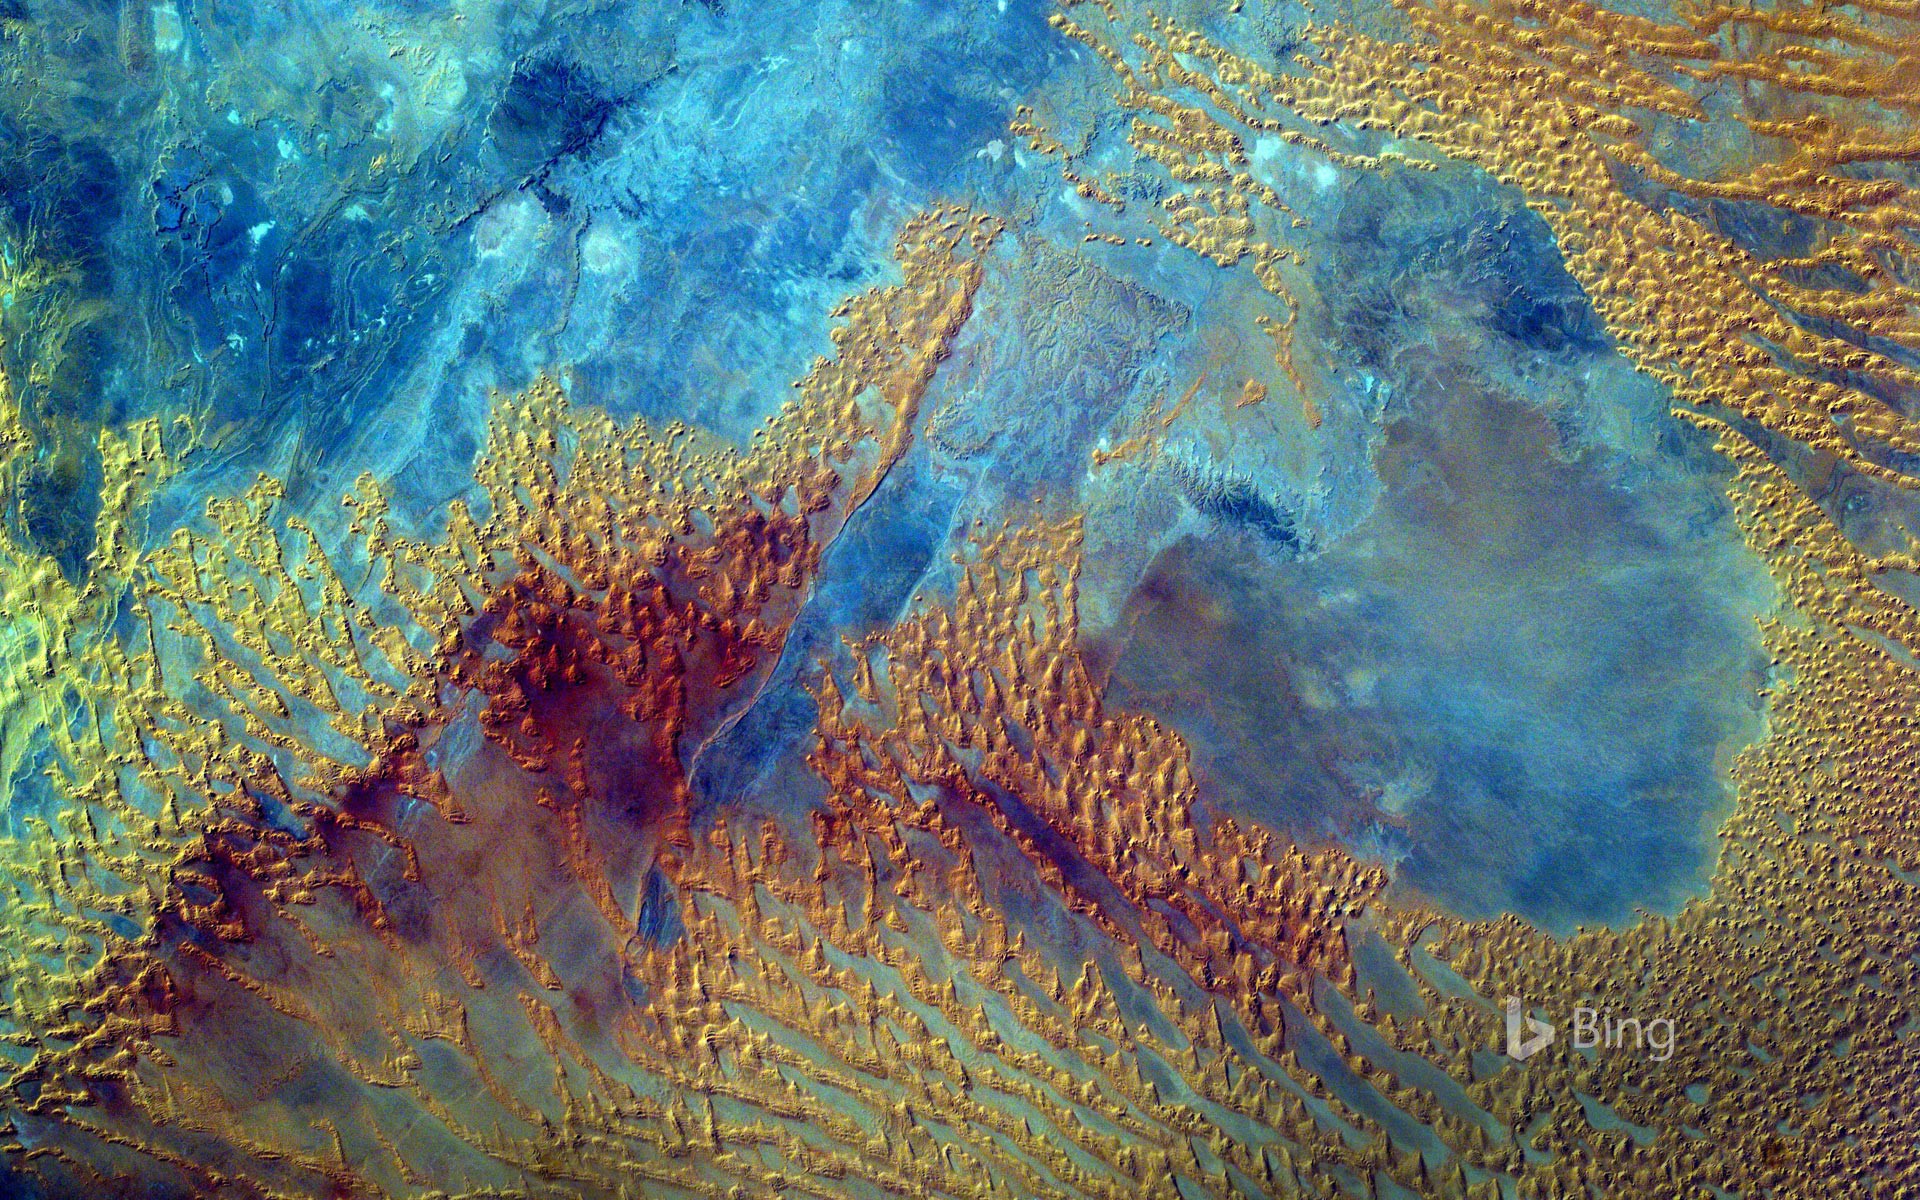 Sahara Desert photographed from the International Space Station by the Sally Ride EarthKAM